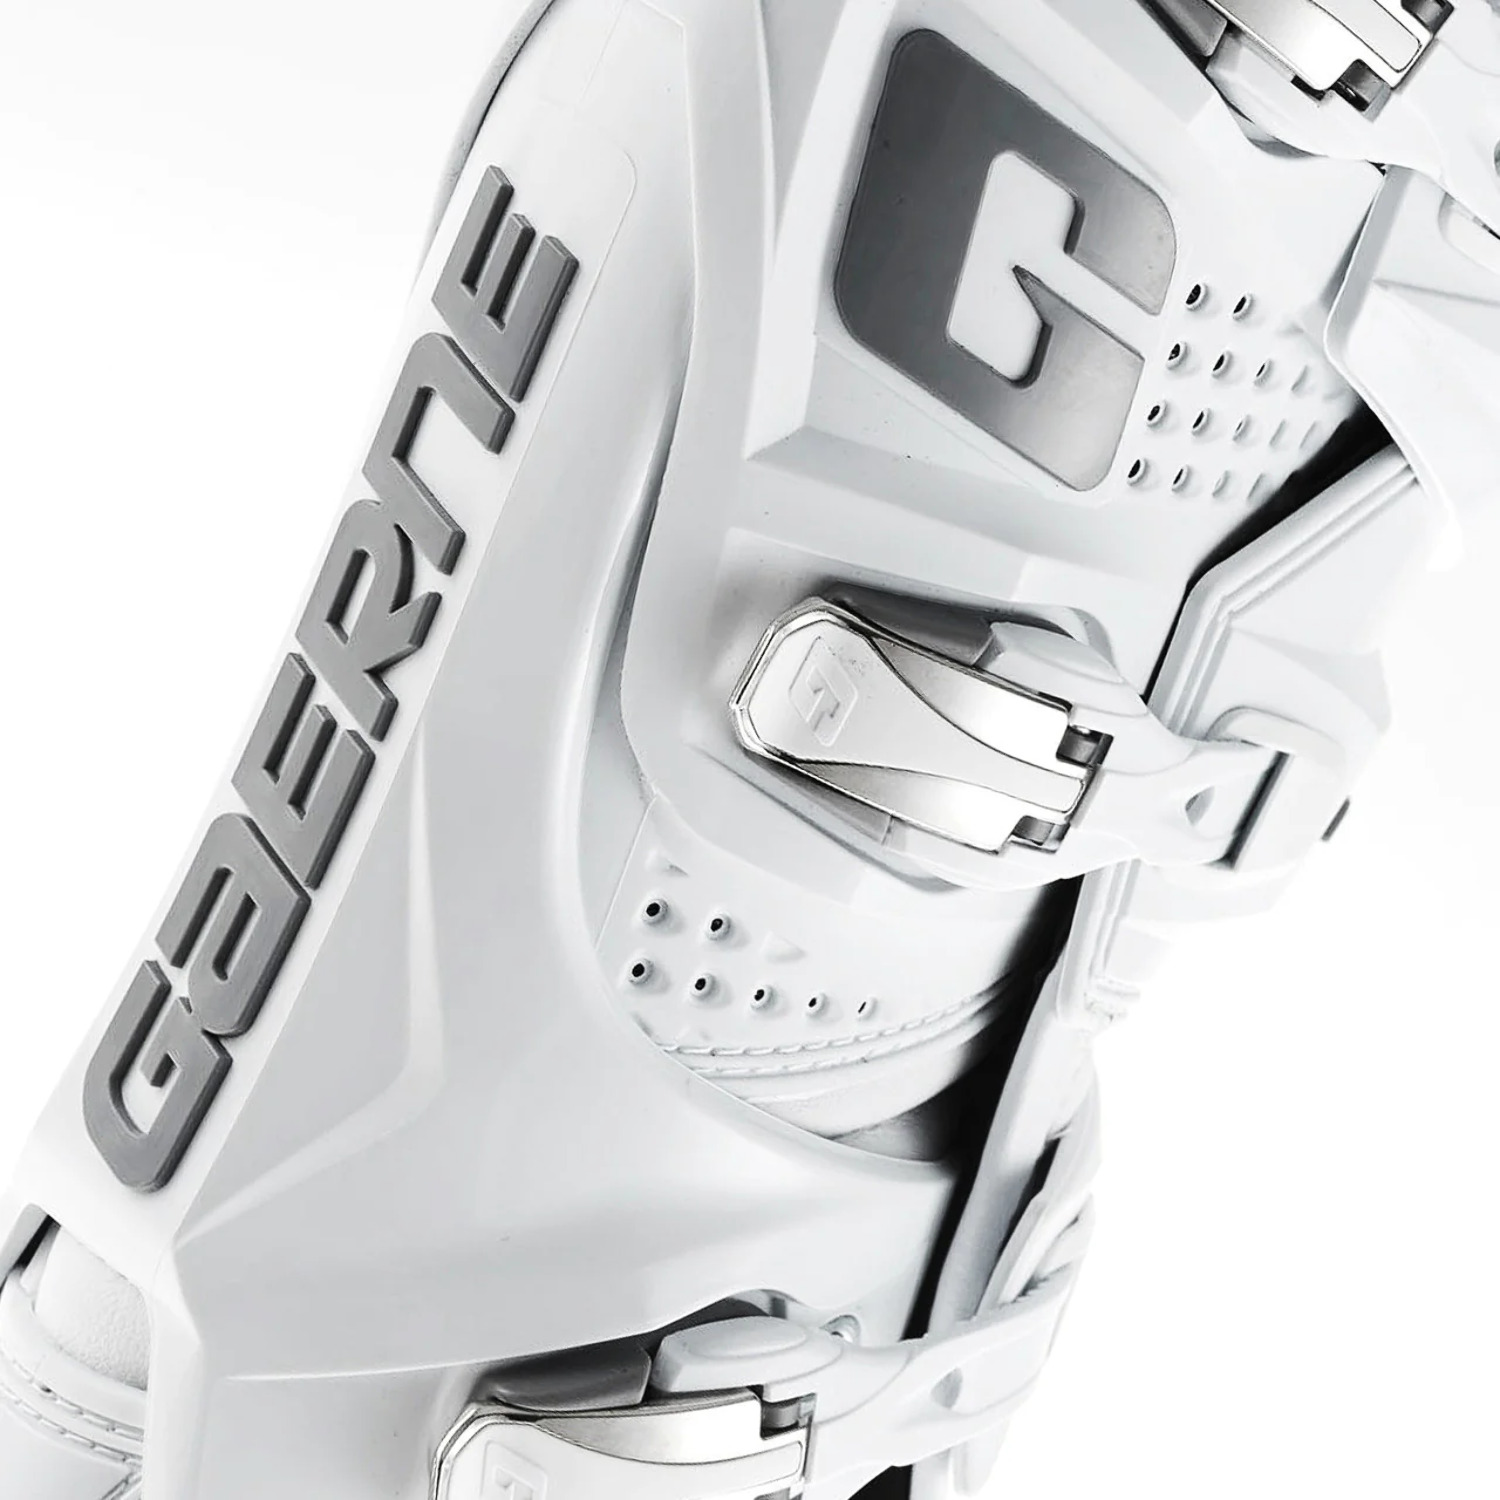 Gaerne SG12 Mens MX Offroad Boots White/Silver 13 USA - image 5 of 9